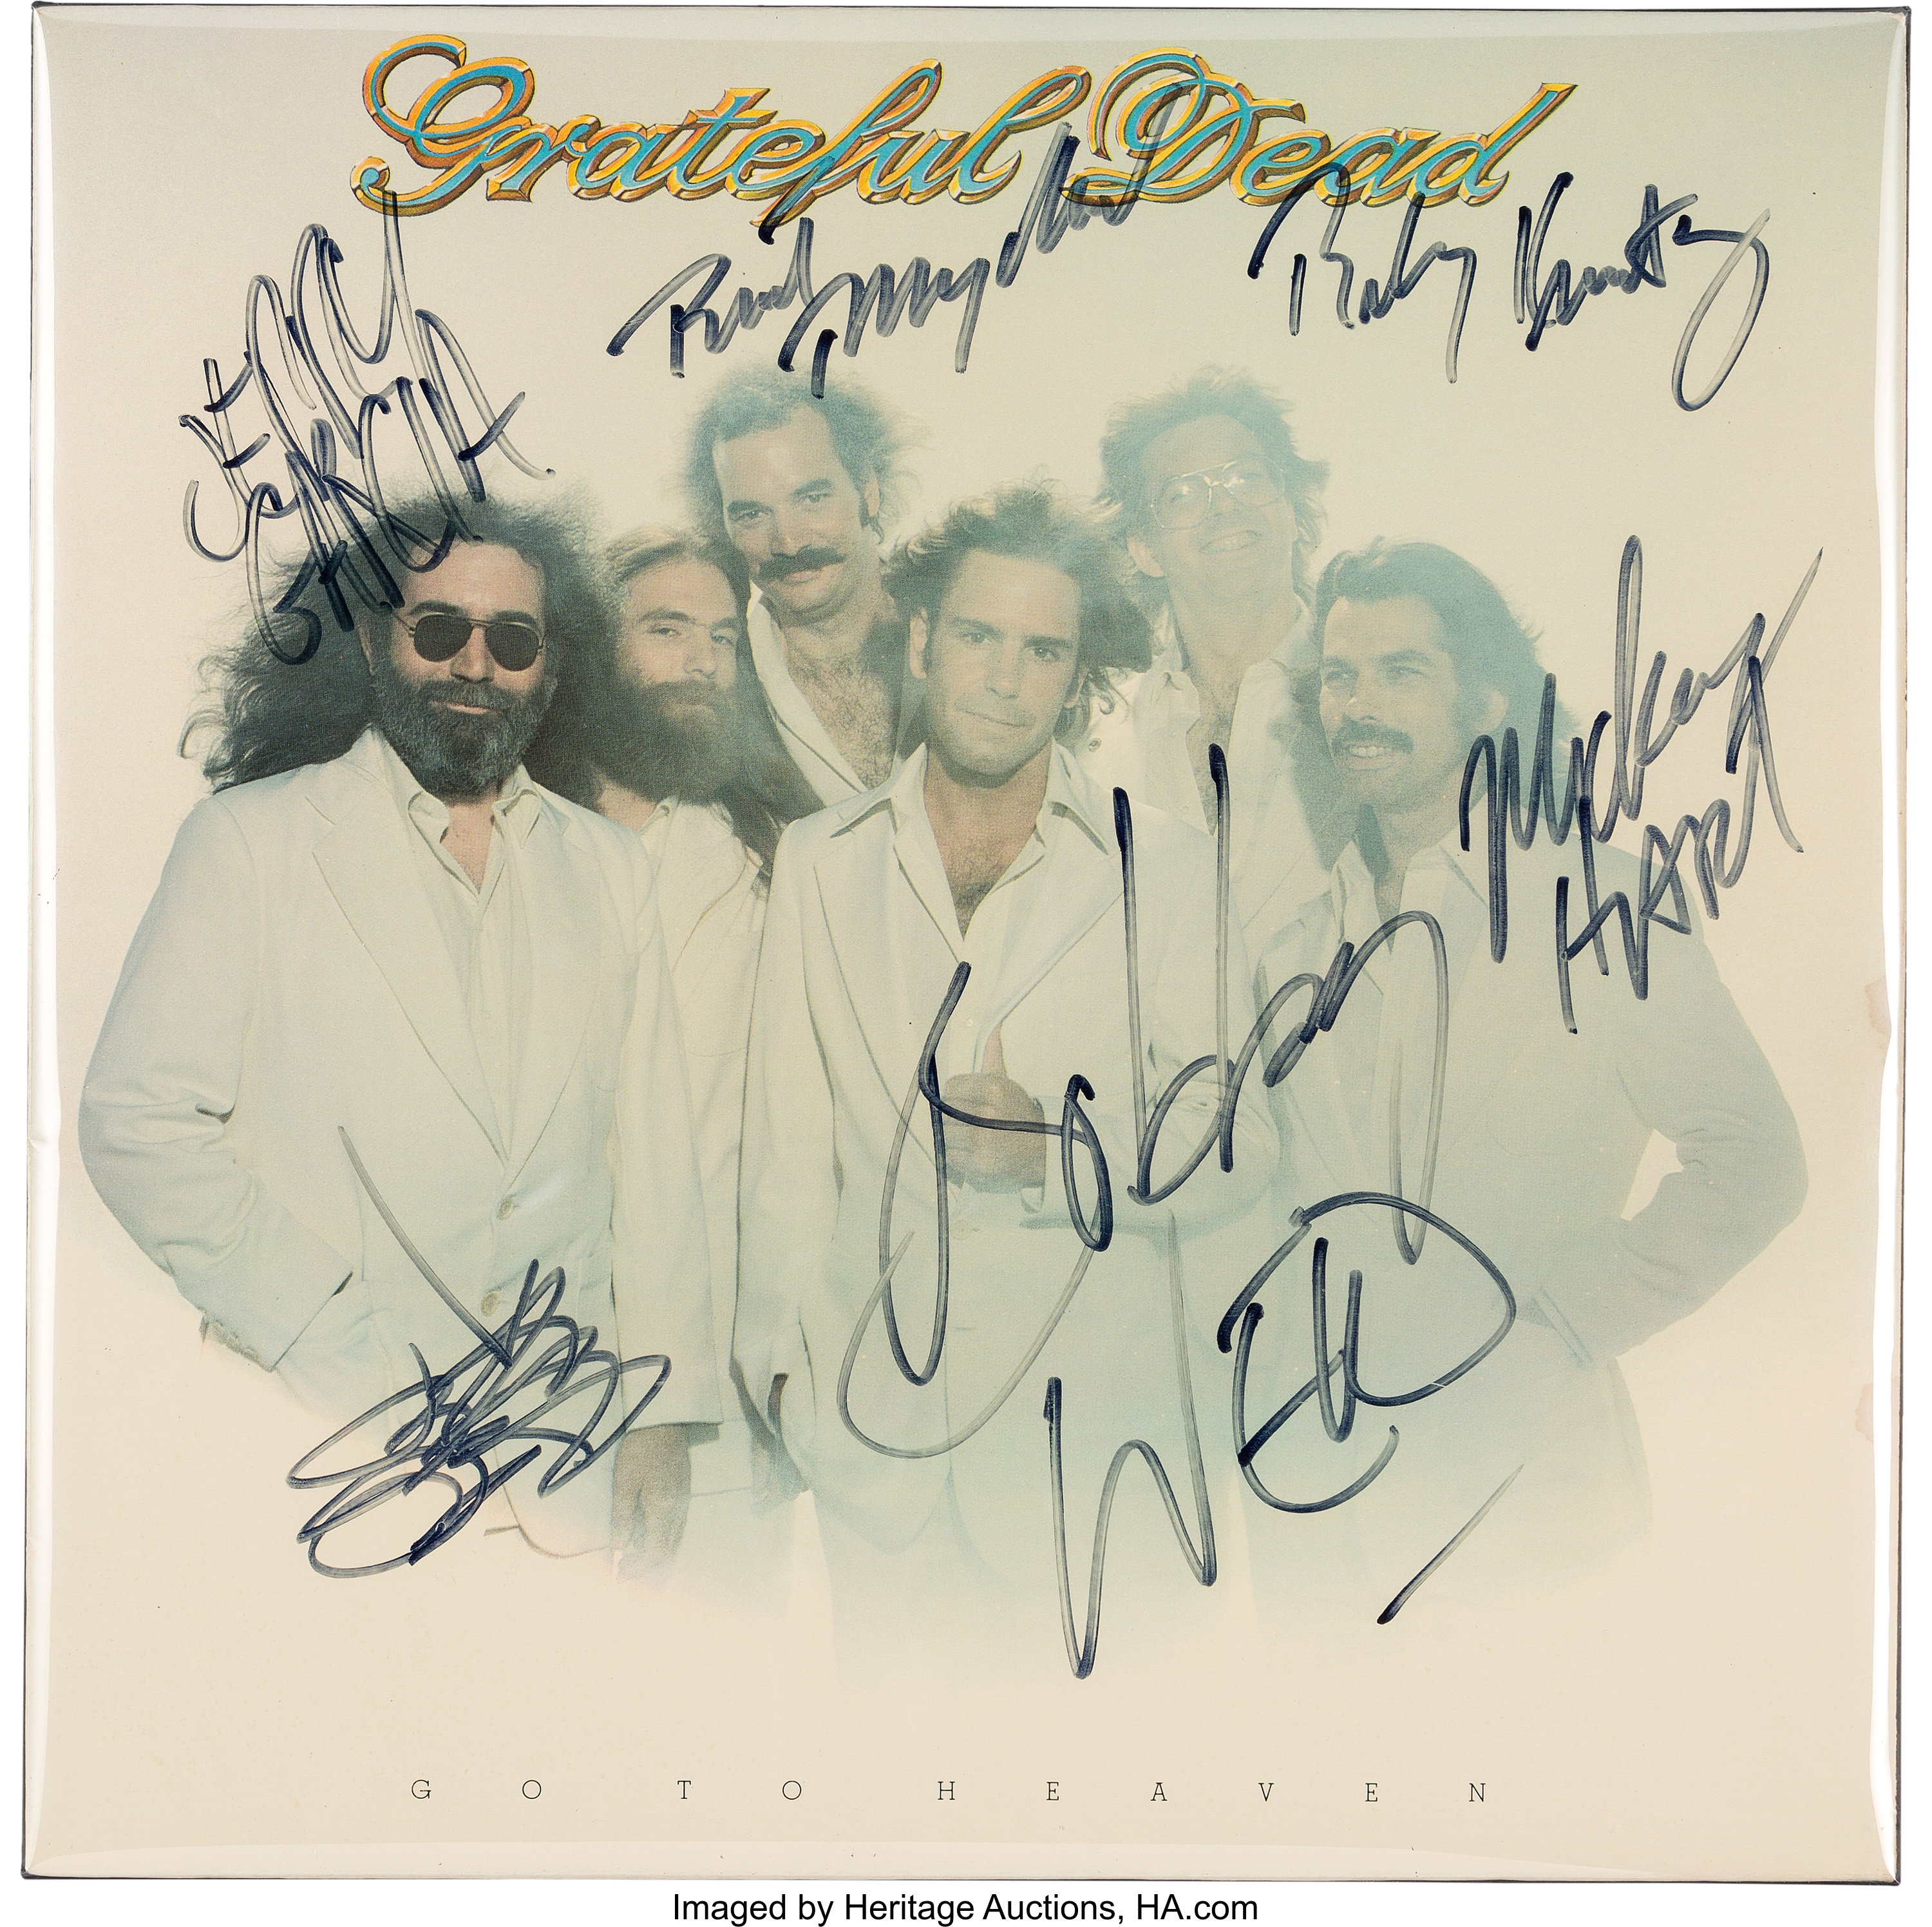 Grateful Dead Band Signed Go To Heaven Lp Sleeve Arista 1980 Lot 395 Heritage Auctions